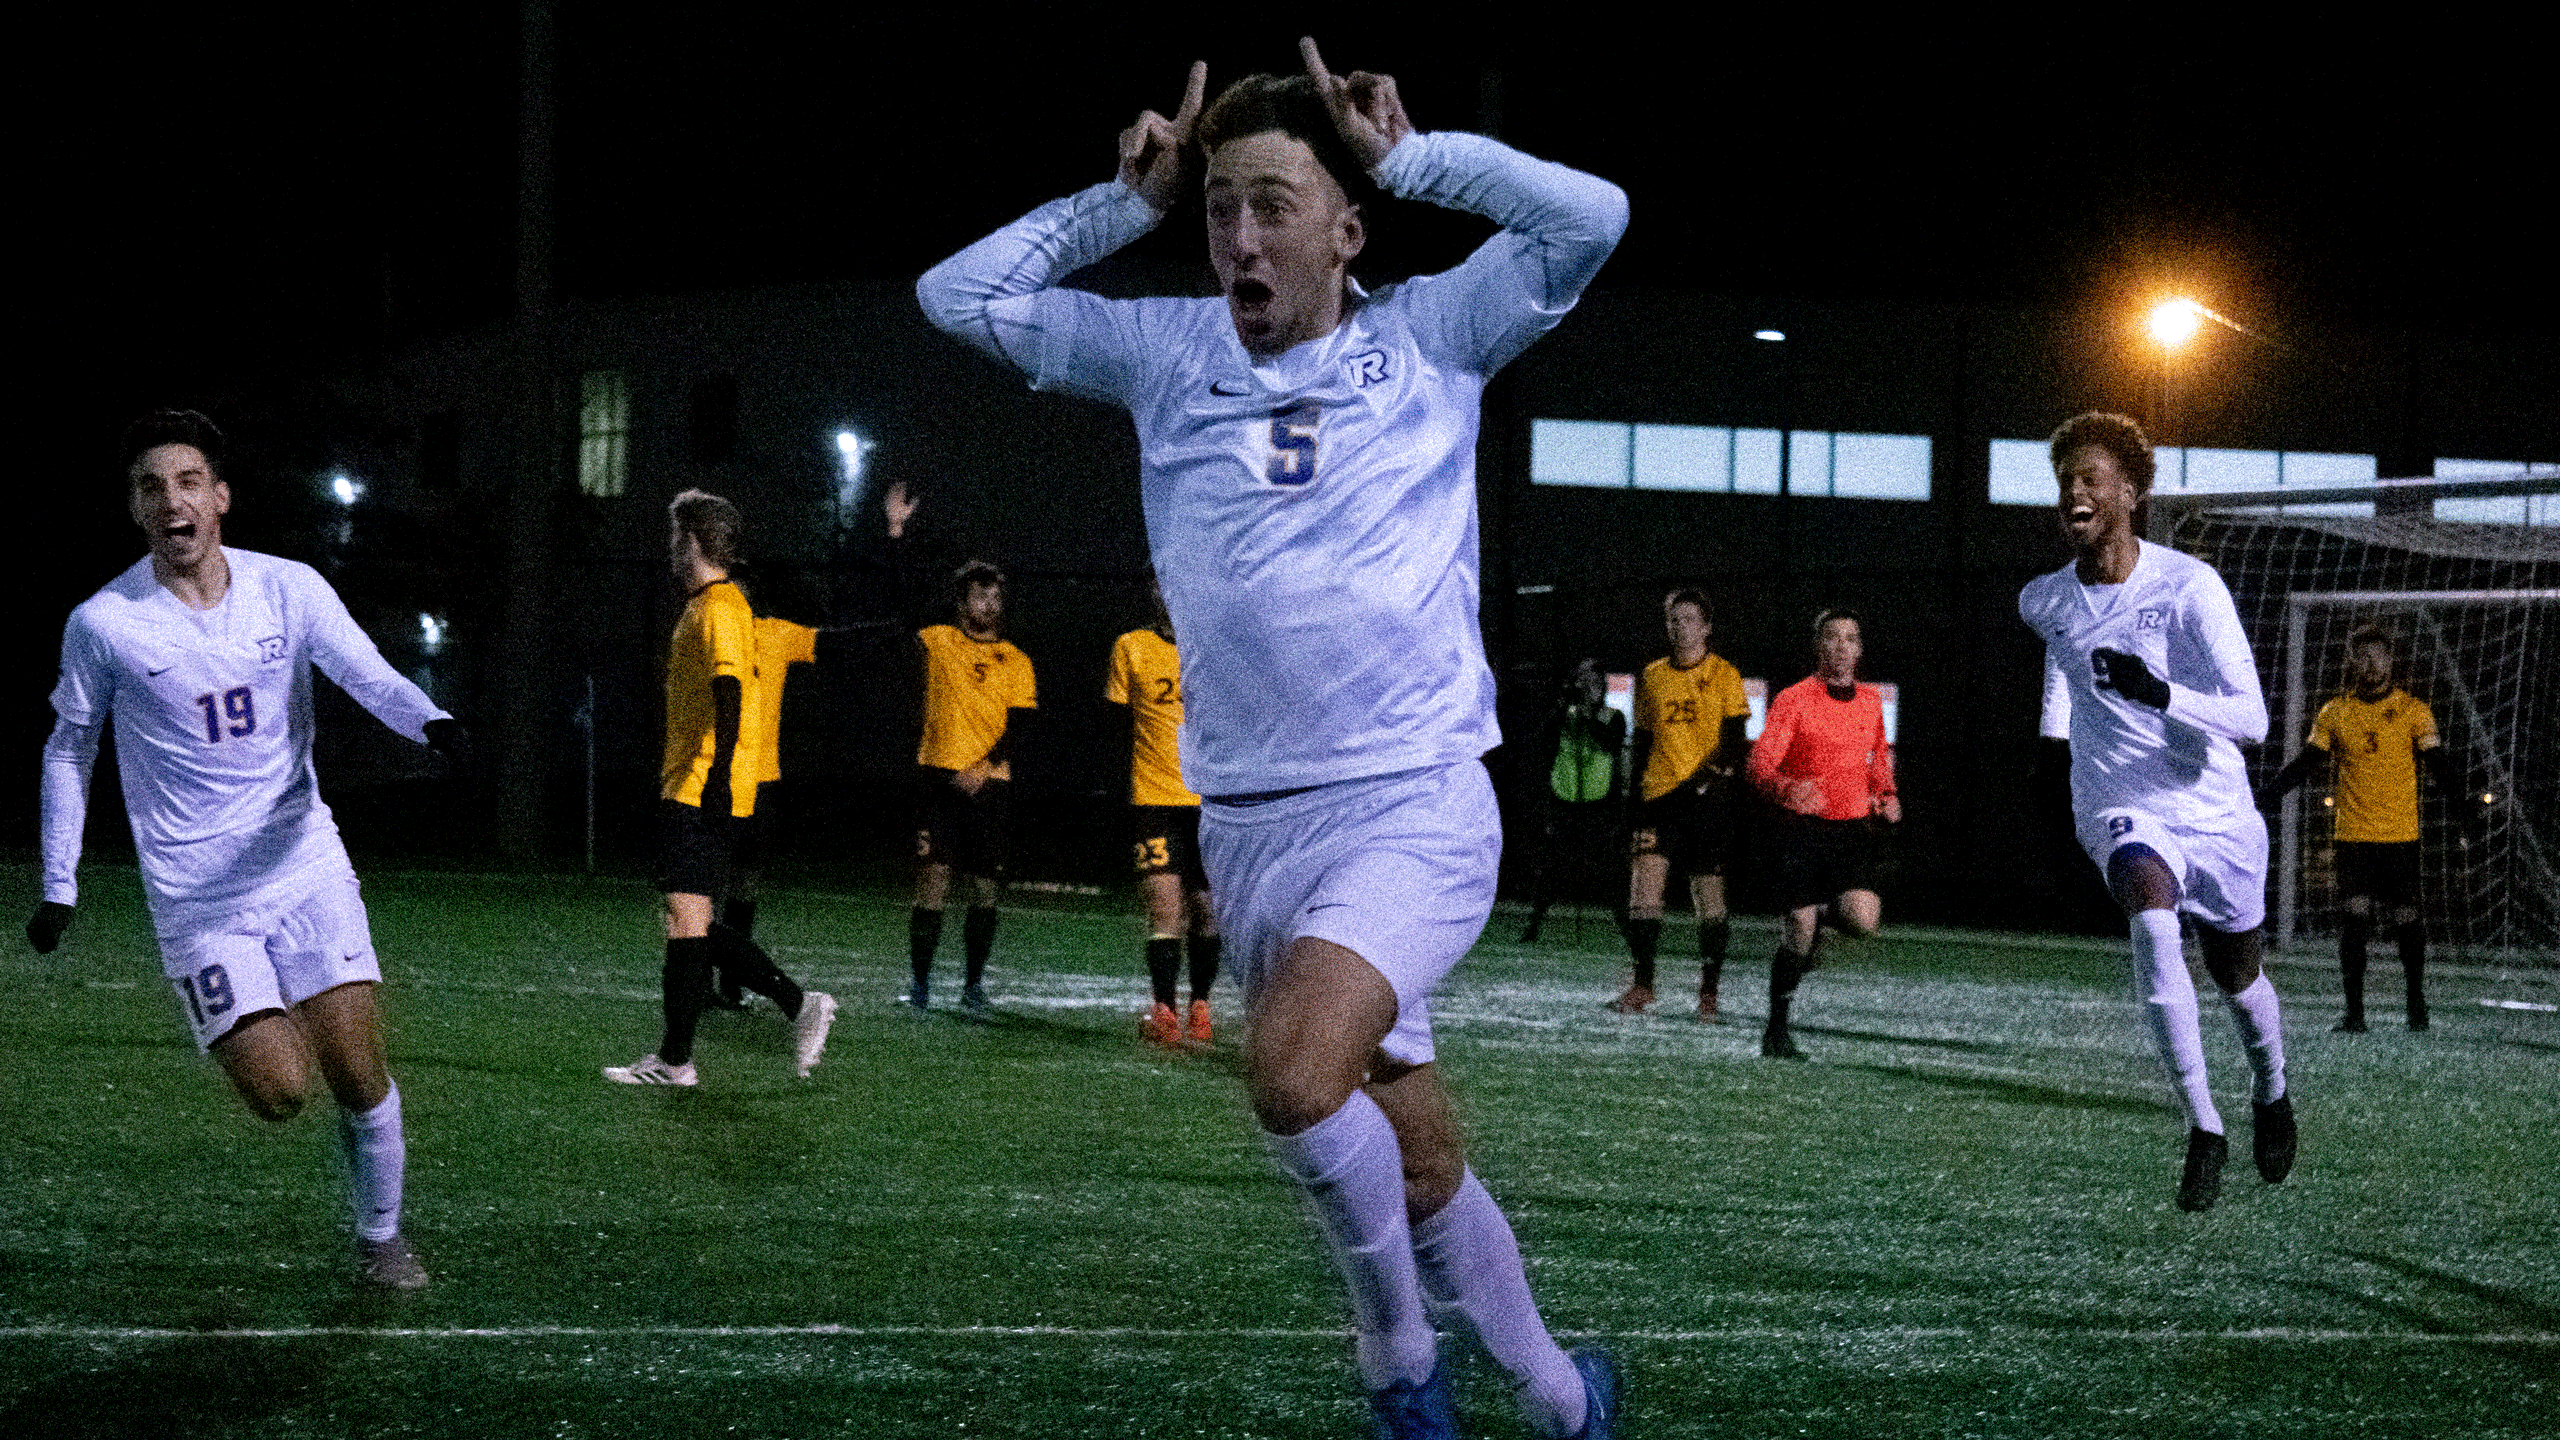 A Rams men's soccer player celebrates a goal by putting horns on his head